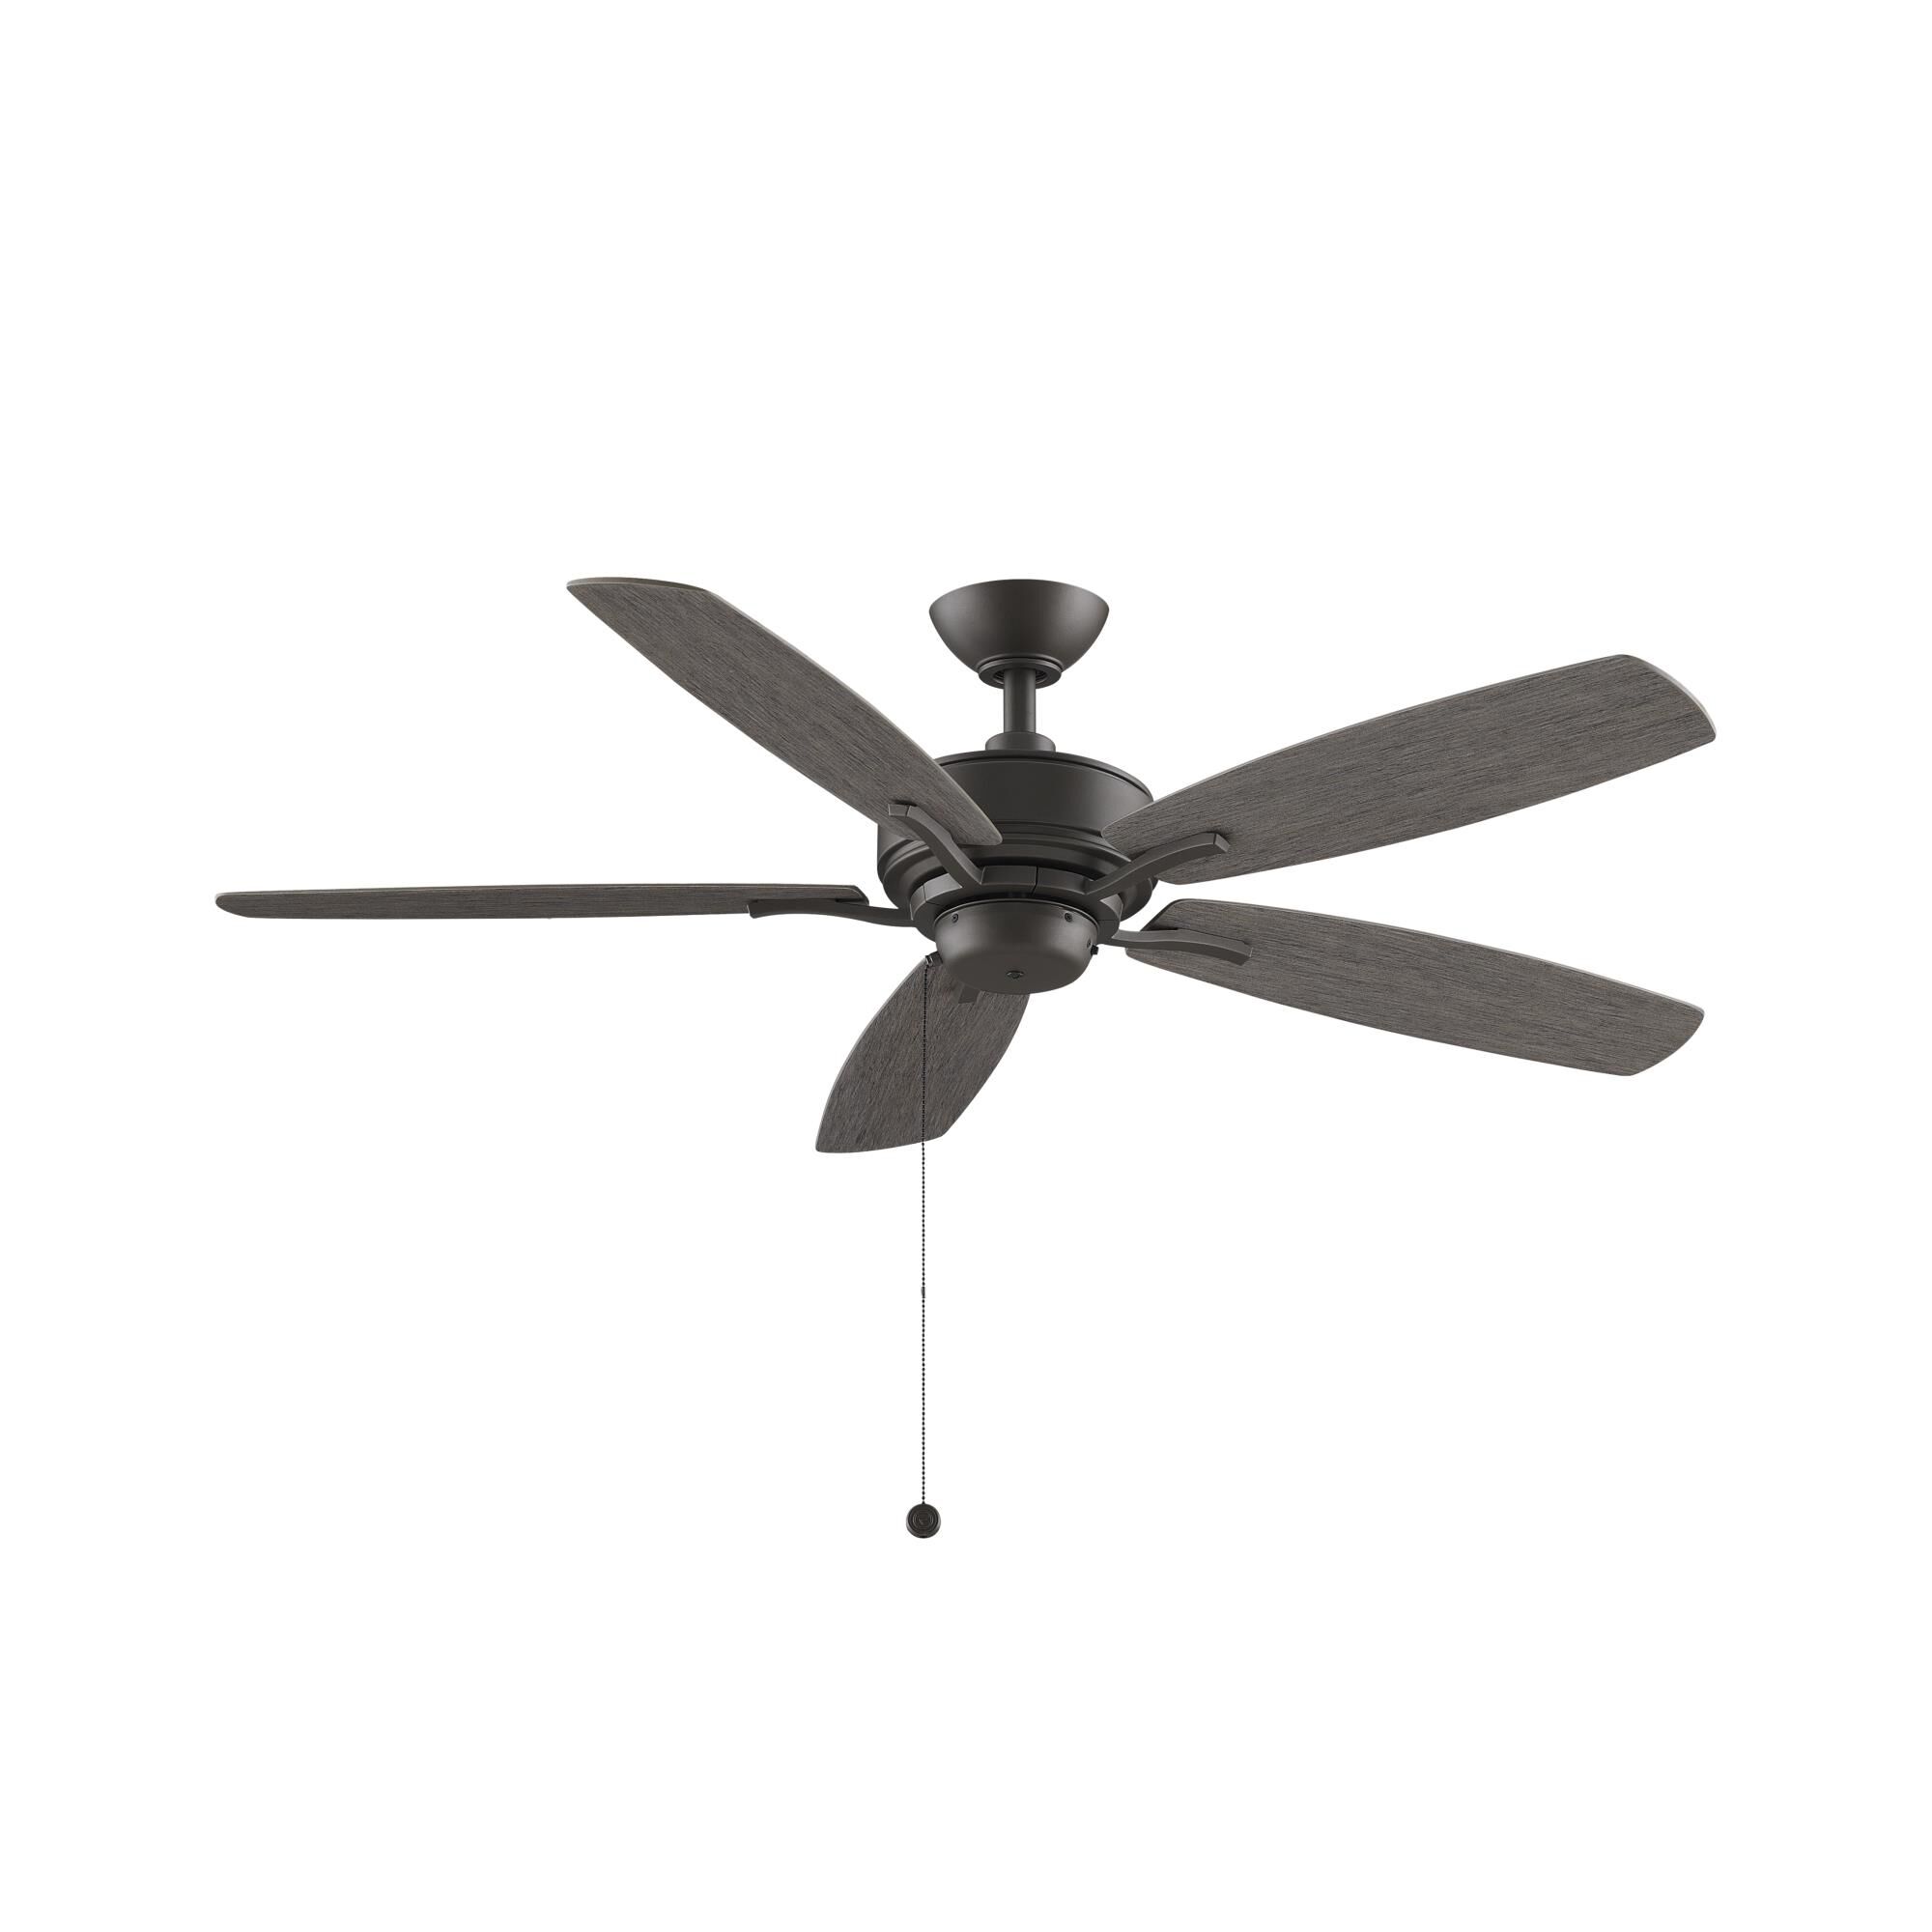 Photos - Fan imation Aire Deluxe Ceiling  Aire Deluxe - FP6284GR - Transitional F